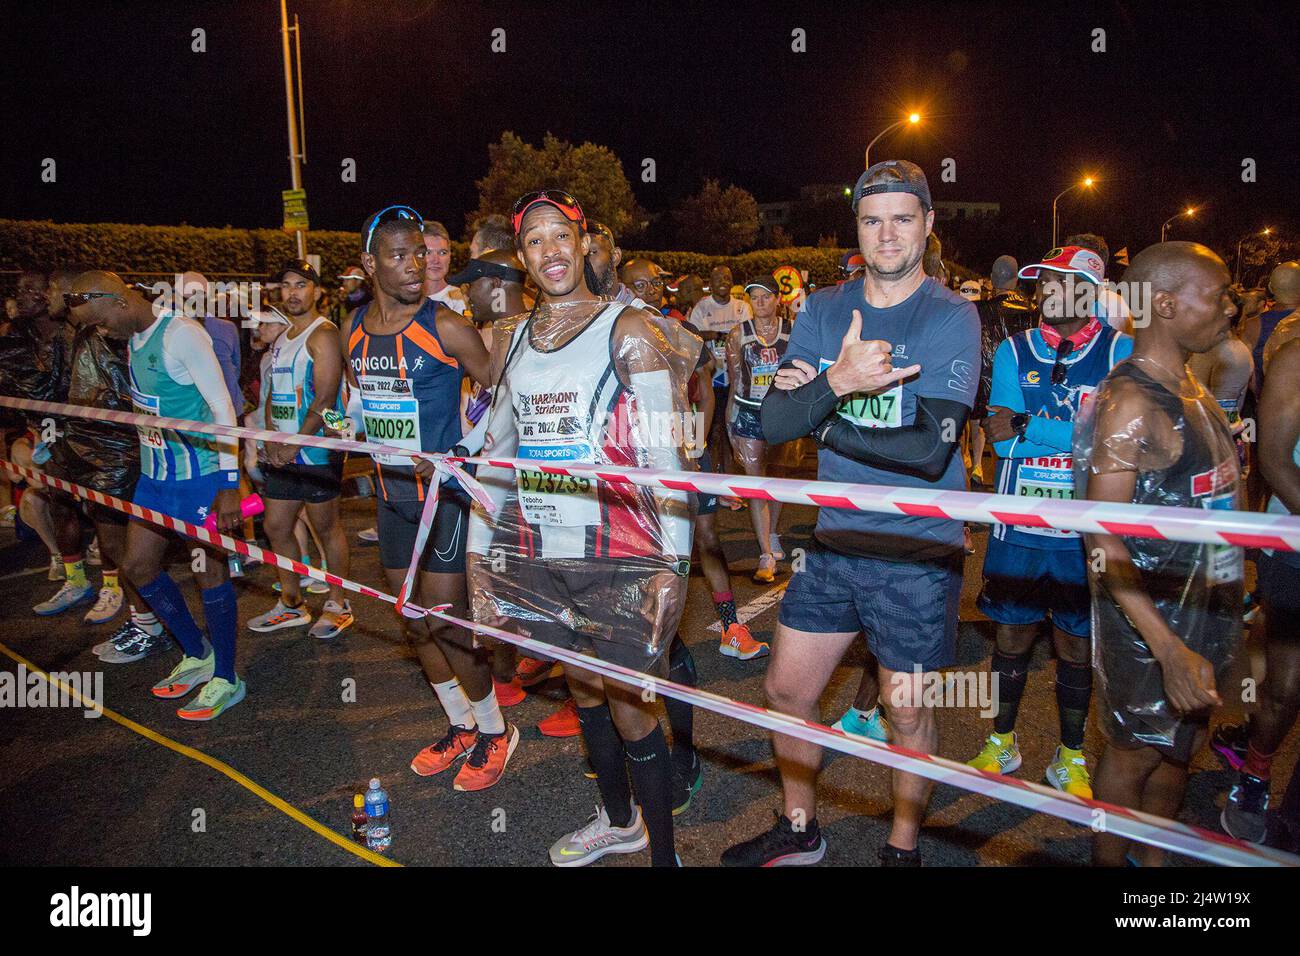 Cape Town, South Africa. 17th Apr, 2022. Runners wait to start the ultra marathon of Two Oceans Marathon in Cape Town, South Africa, on April 17, 2022. The two-day Two Oceans Marathon took place after a two-year hiatus due to COVID-19 pandemic. Credit: Francisco Scarbar/Xinhua/Alamy Live News Stock Photo